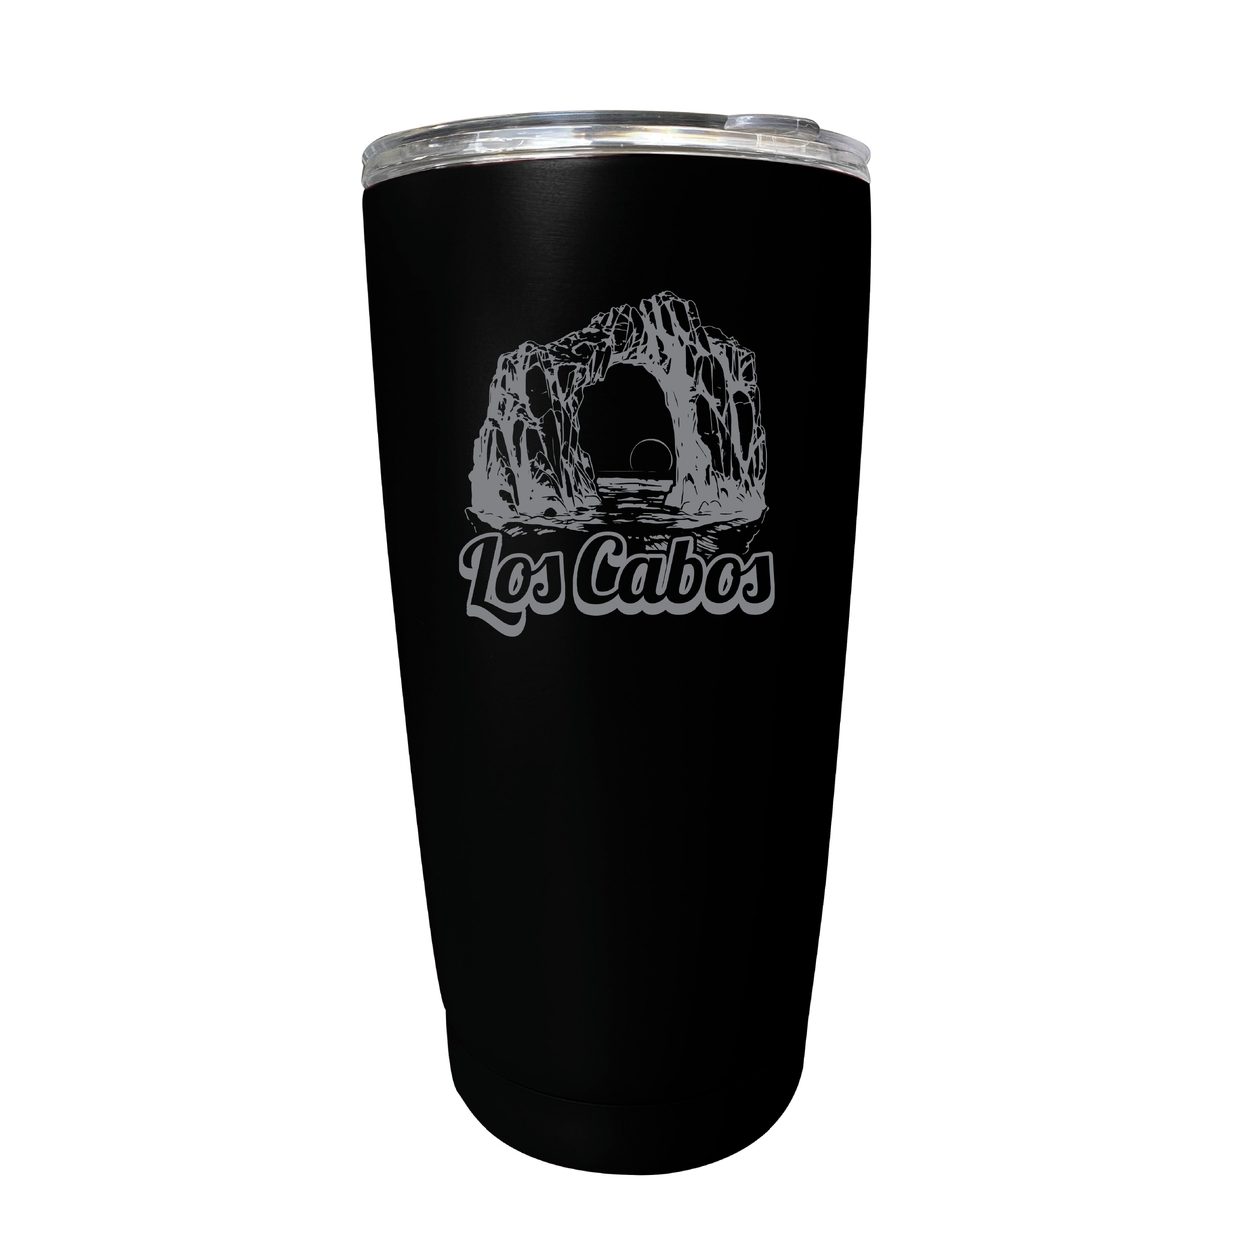 Los Cabos Mexico Souvenir 16 Oz Engraved Stainless Steel Insulated Tumbler - Black,,2-Pack